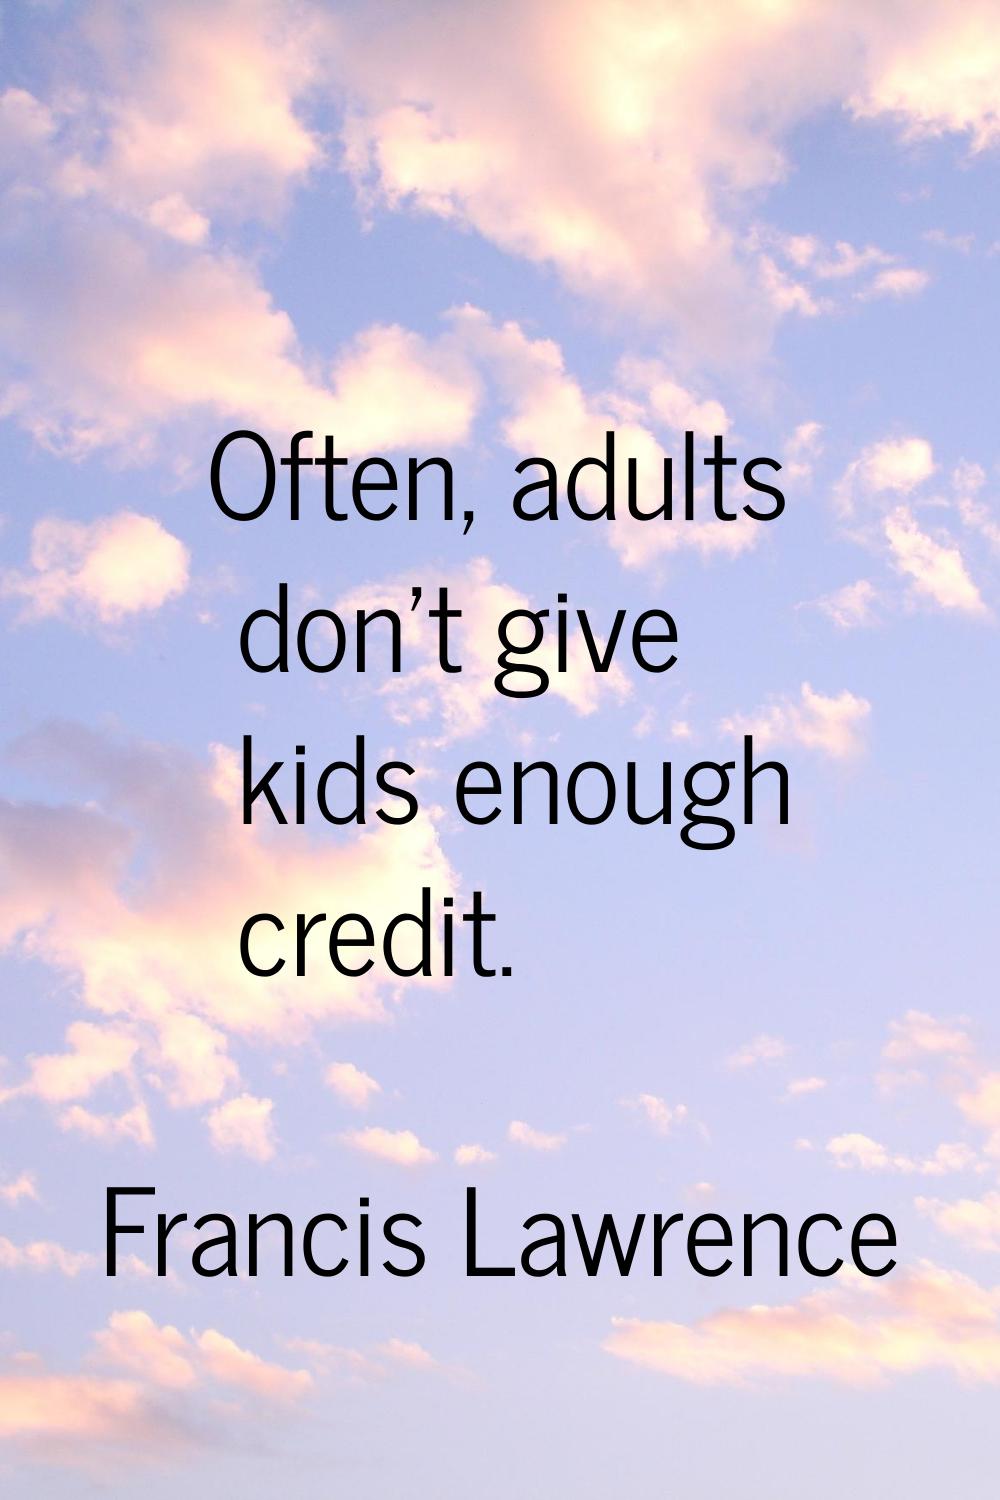 Often, adults don't give kids enough credit.